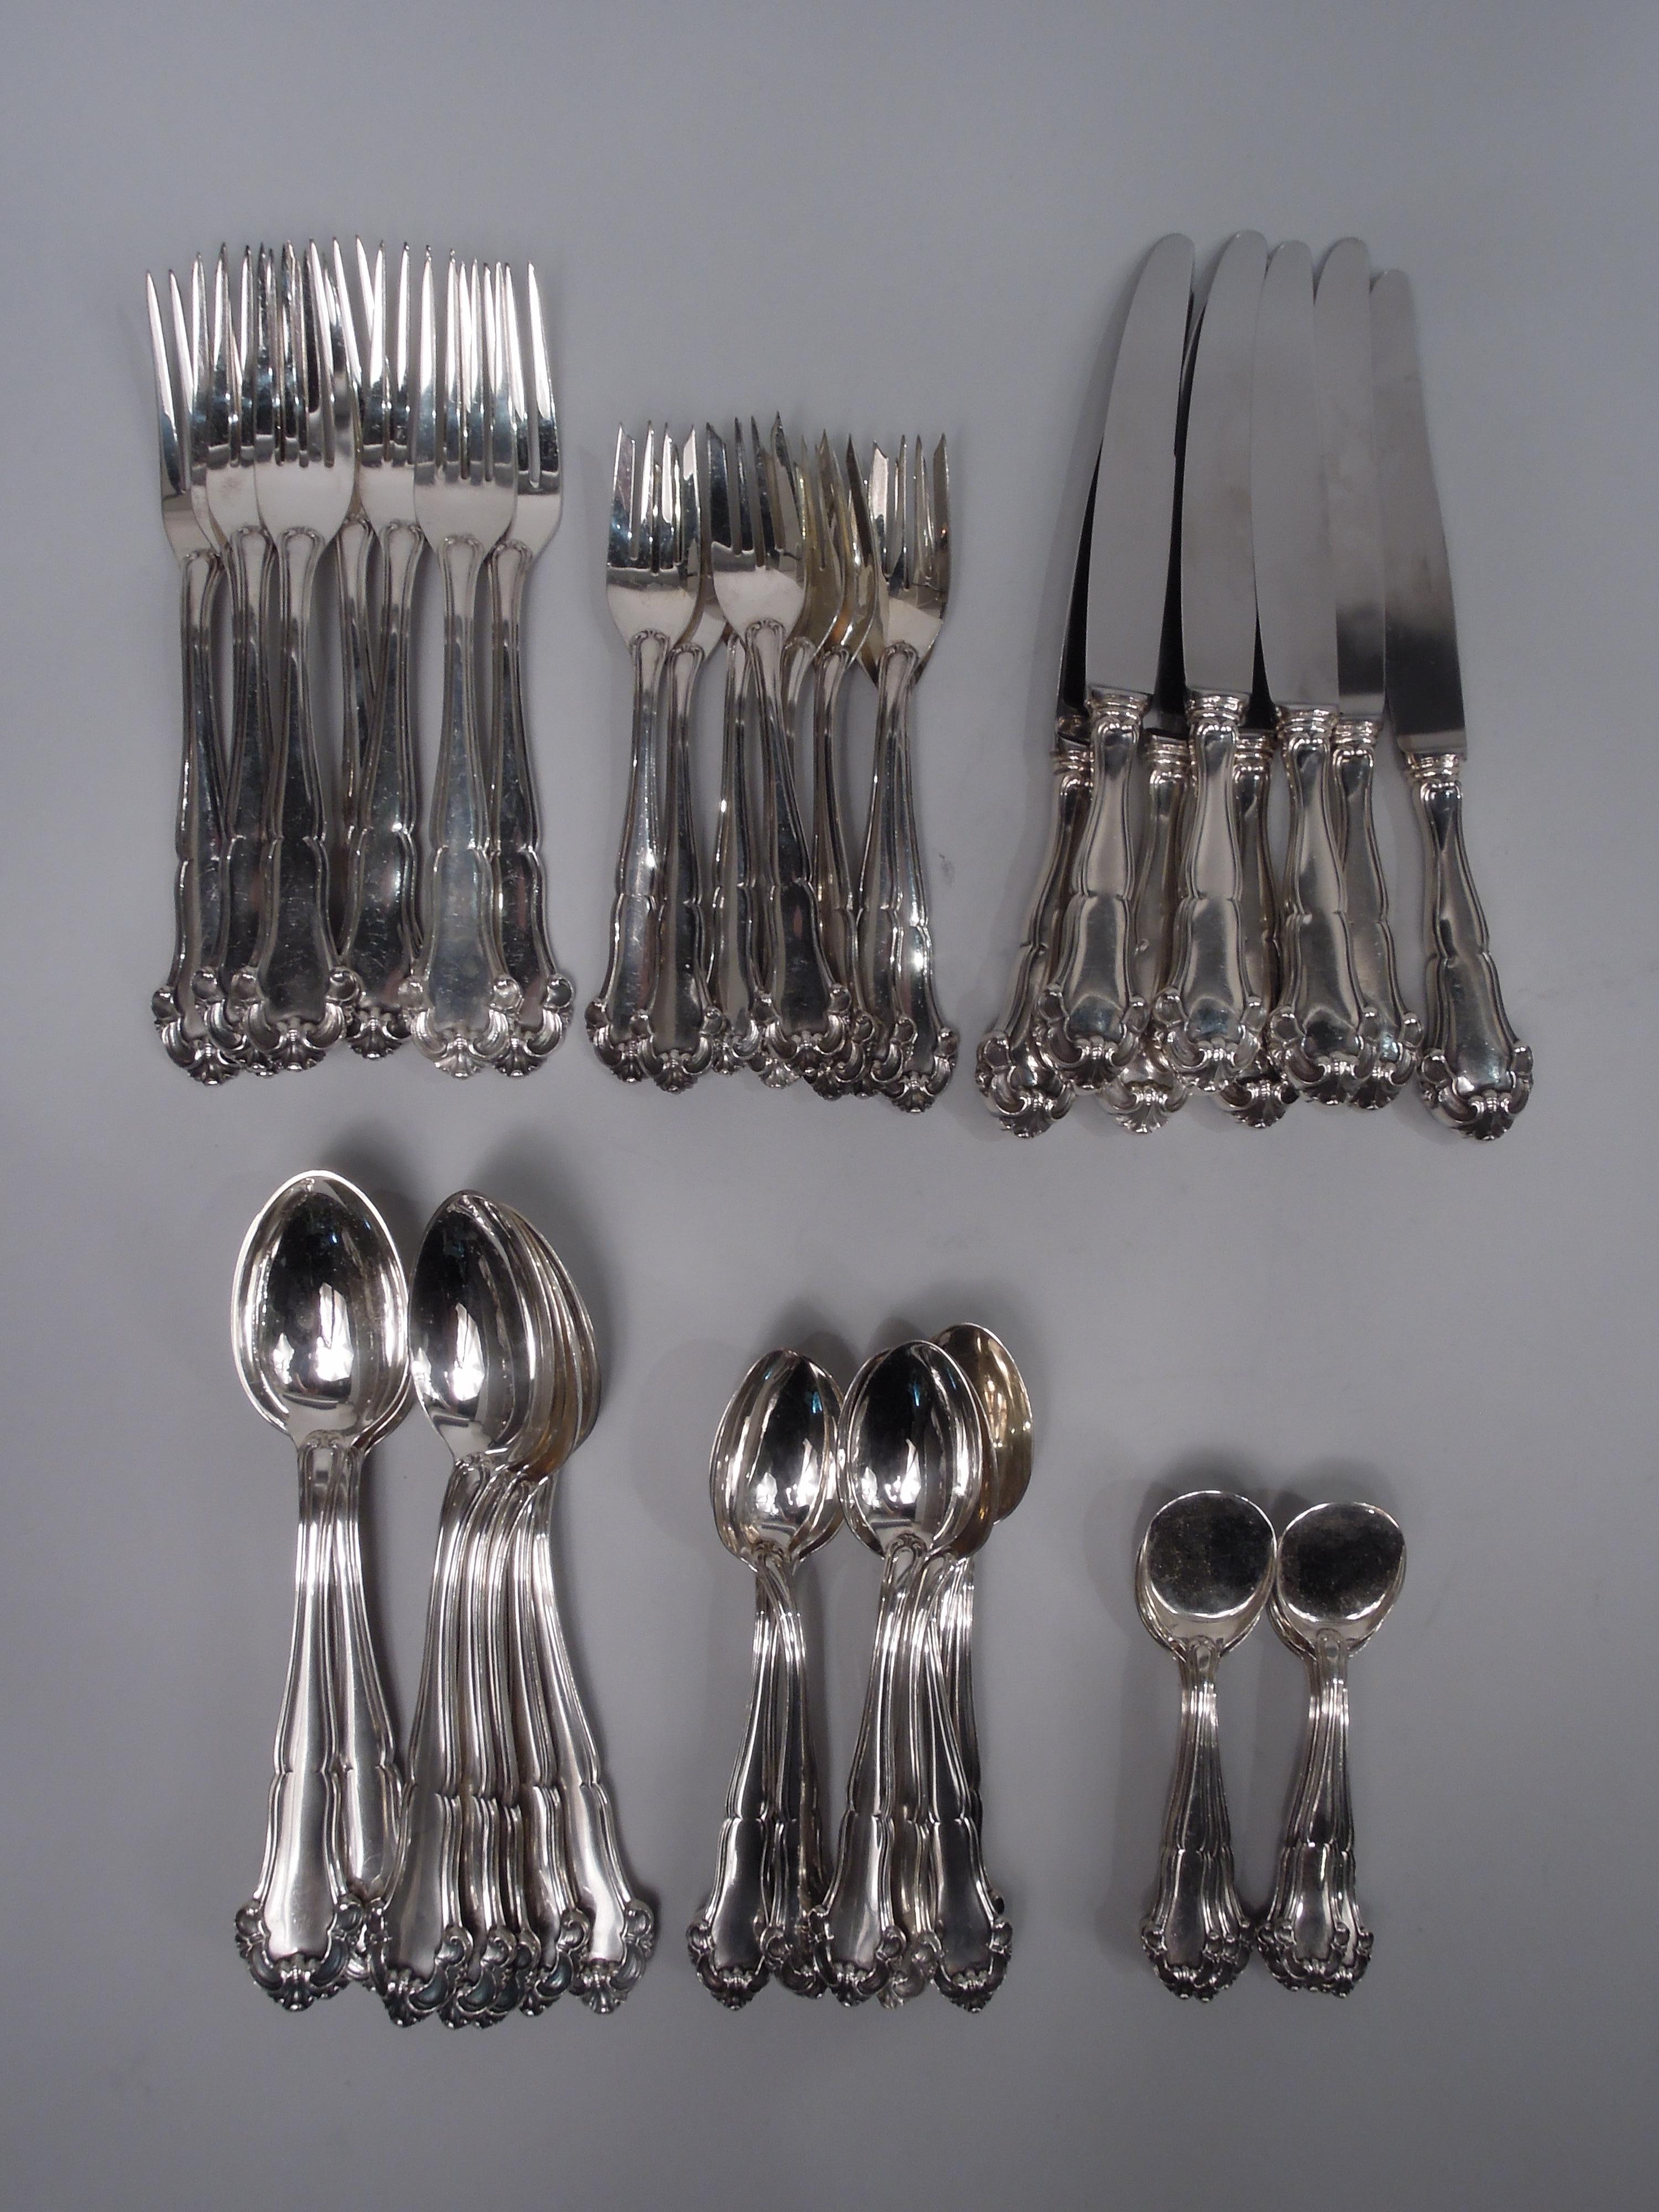 Grande Imperiale sterling silver dinner set. Made by Mario Buccellati in Italy. This set comprises 48 pieces (dimensions in inches):

Forks: 8 dinner forks (8 5/8) and 8 salad forks (7);

Spoons: 8 tablespoons (8 1/2), 8 dessert spoons (6 7/8), and